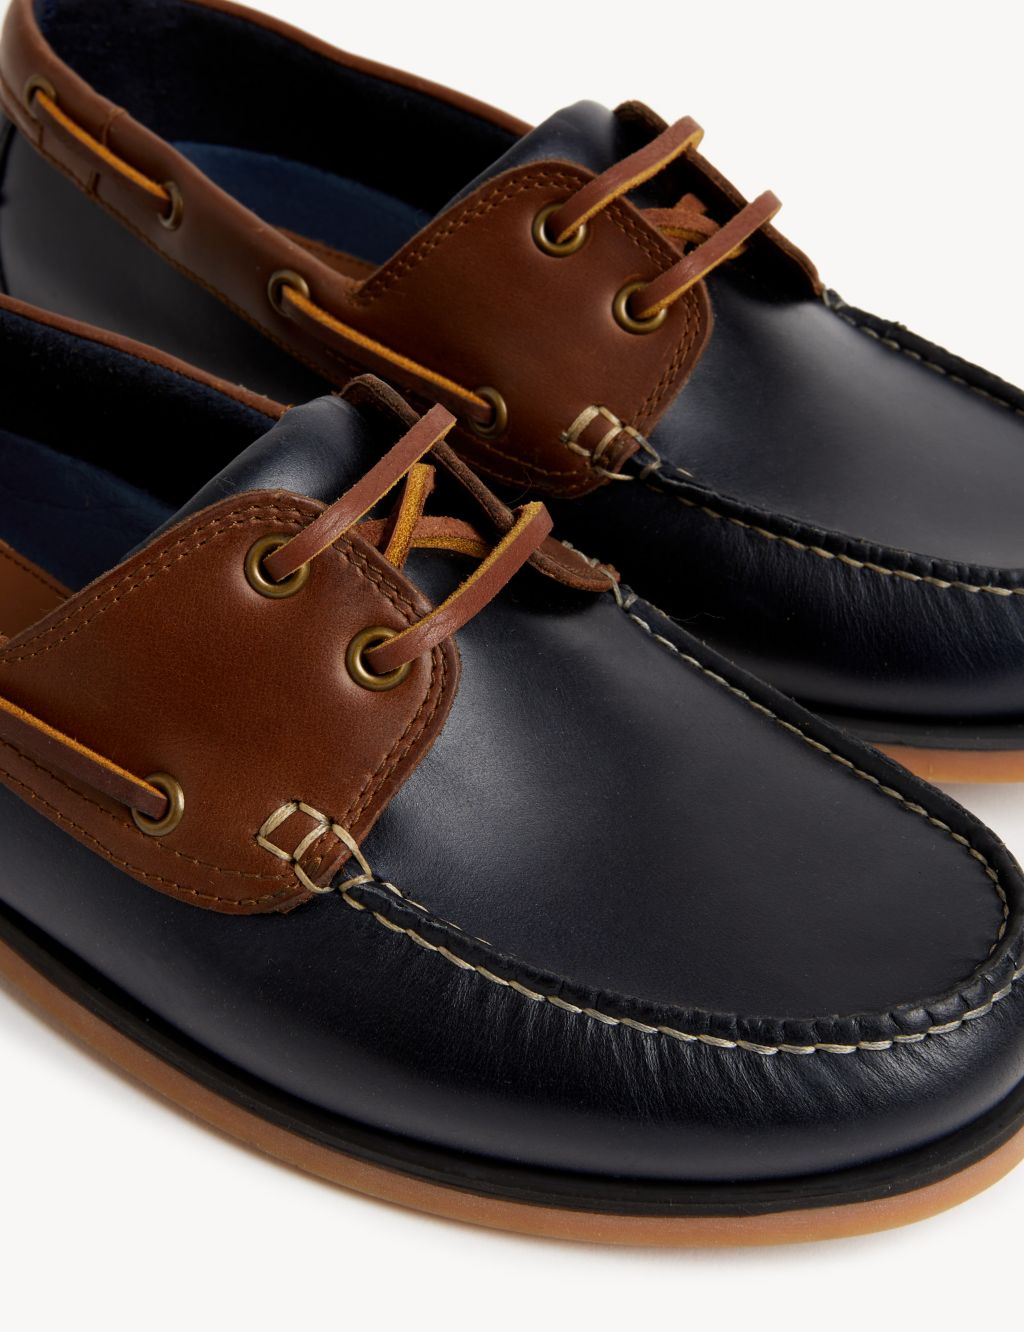 Wide Fit Leather Deck Shoes image 2